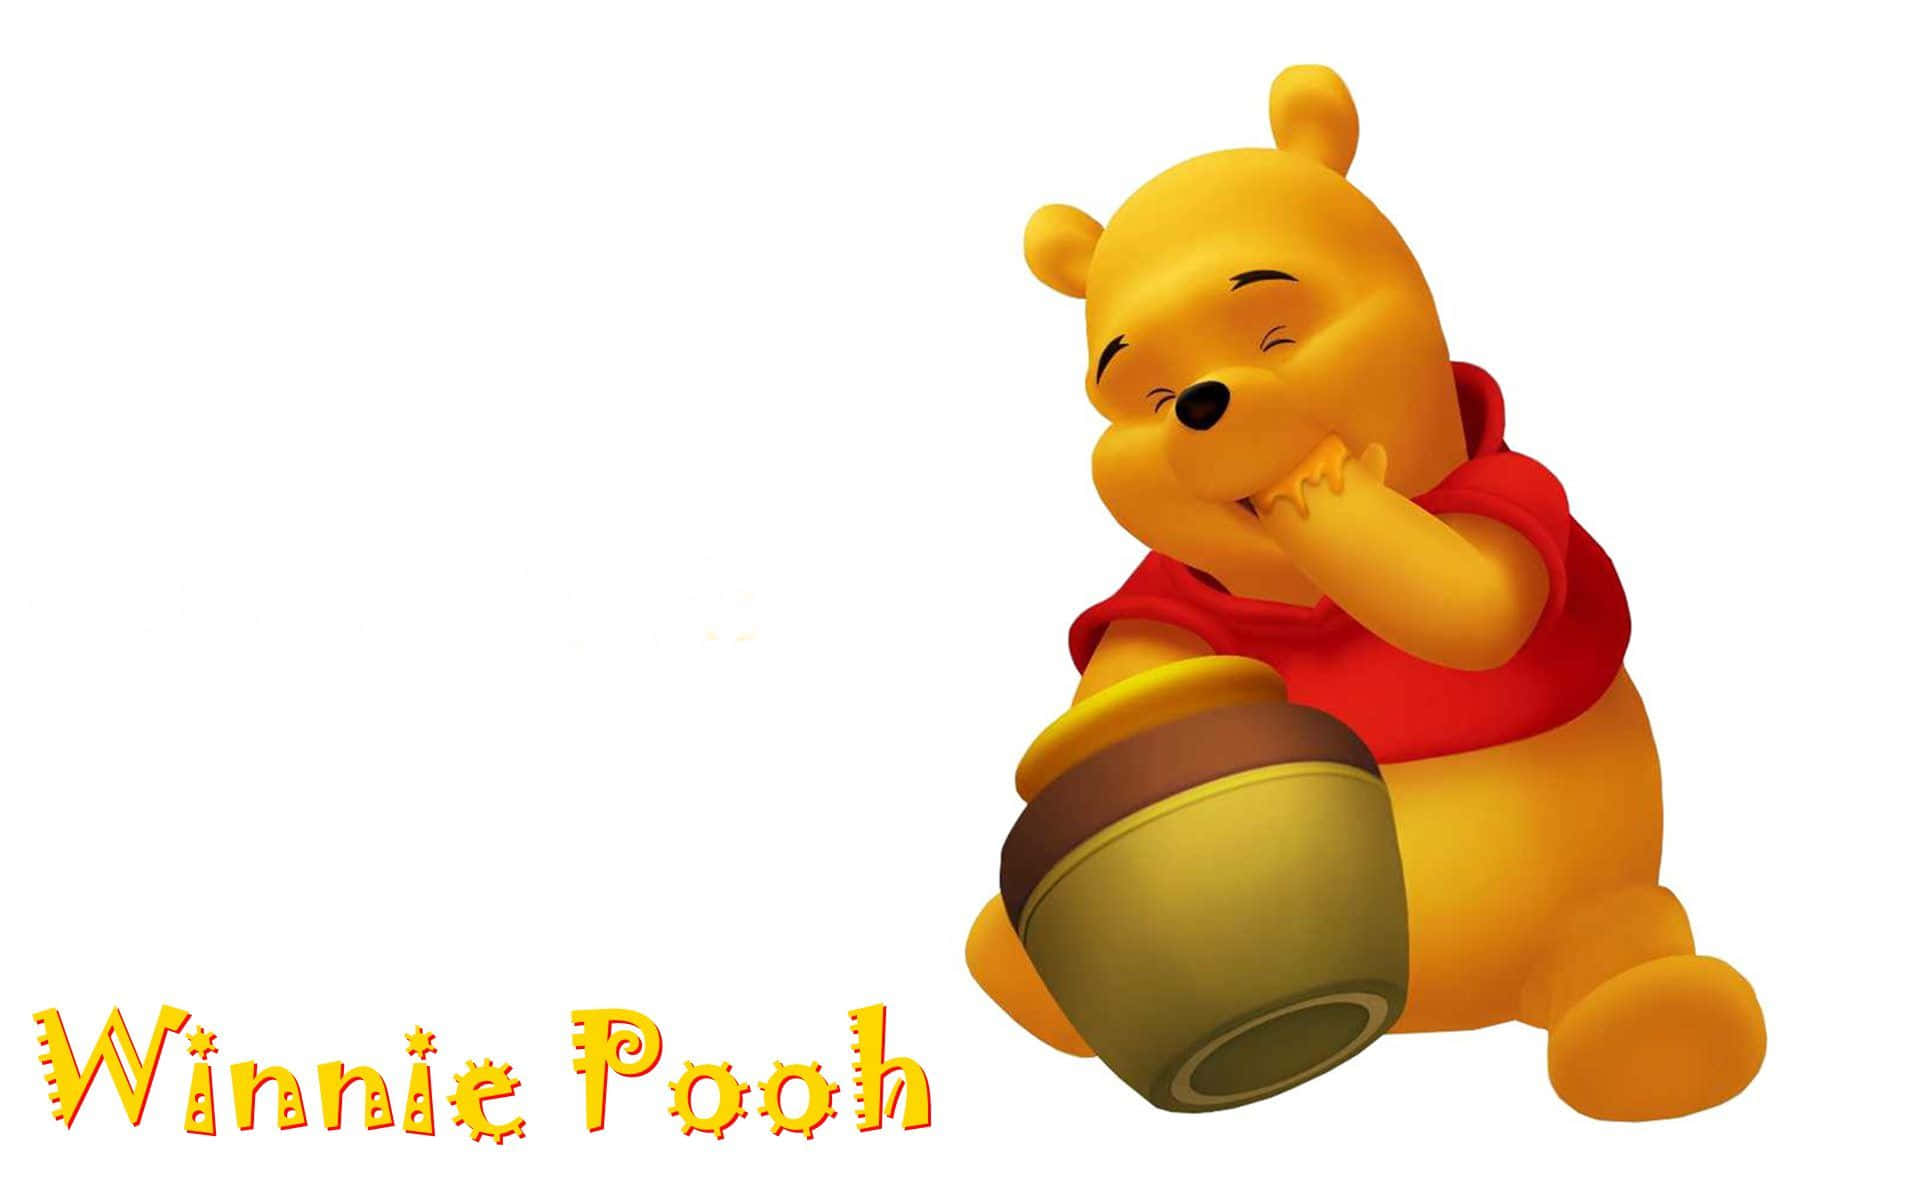 Get your work done faster with a Winnie The Pooh-inspired laptop Wallpaper